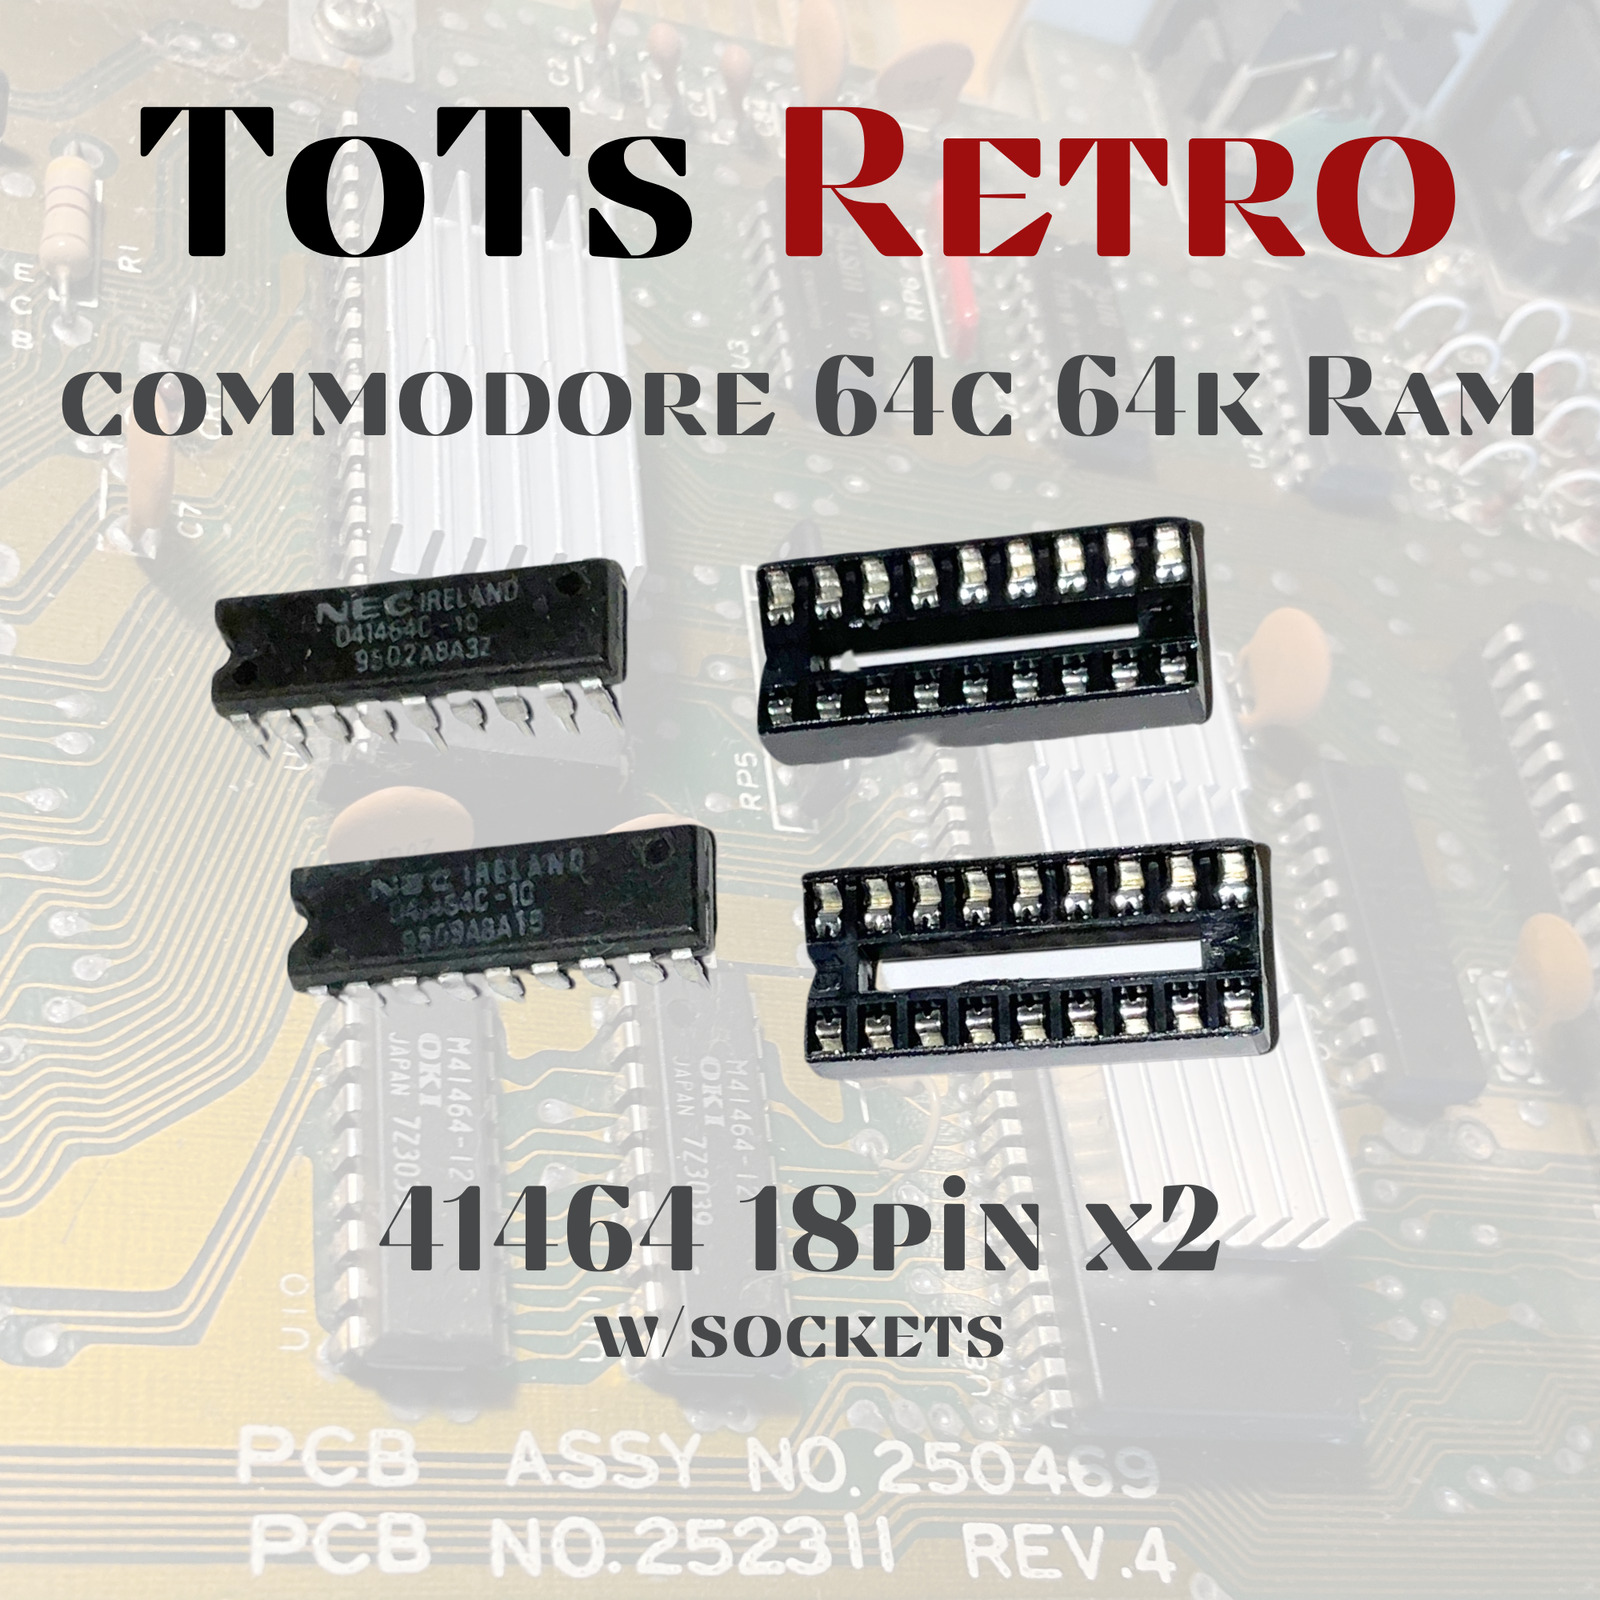 Commodore 64c Ram Replacement 41464-10 18Pin DIP w/Sockets and TESTED